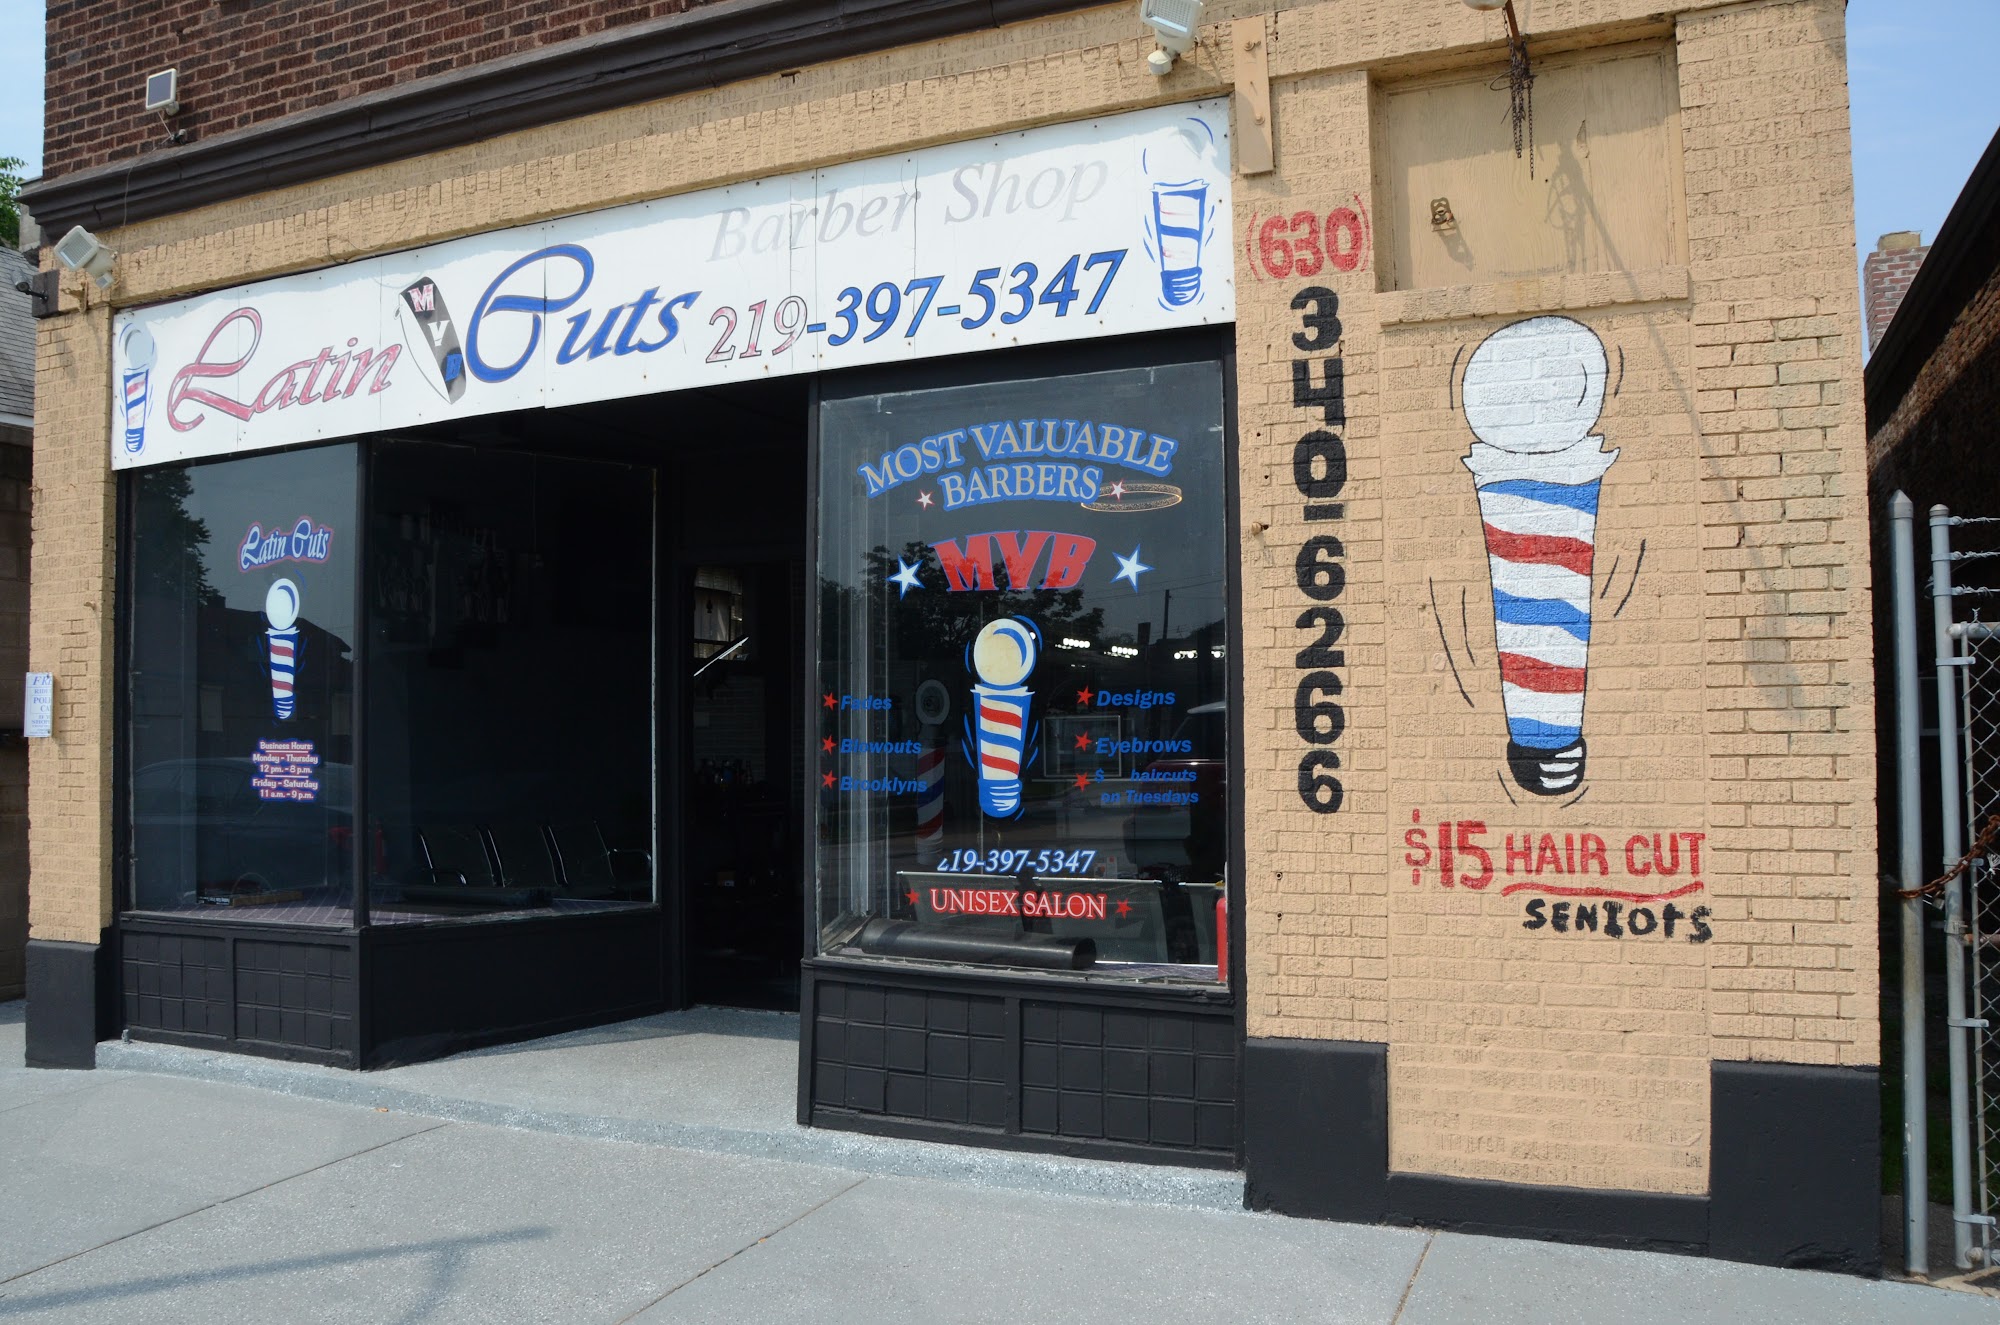 Latin Cuts 4914 Indianapolis Blvd, East Chicago Indiana 46312